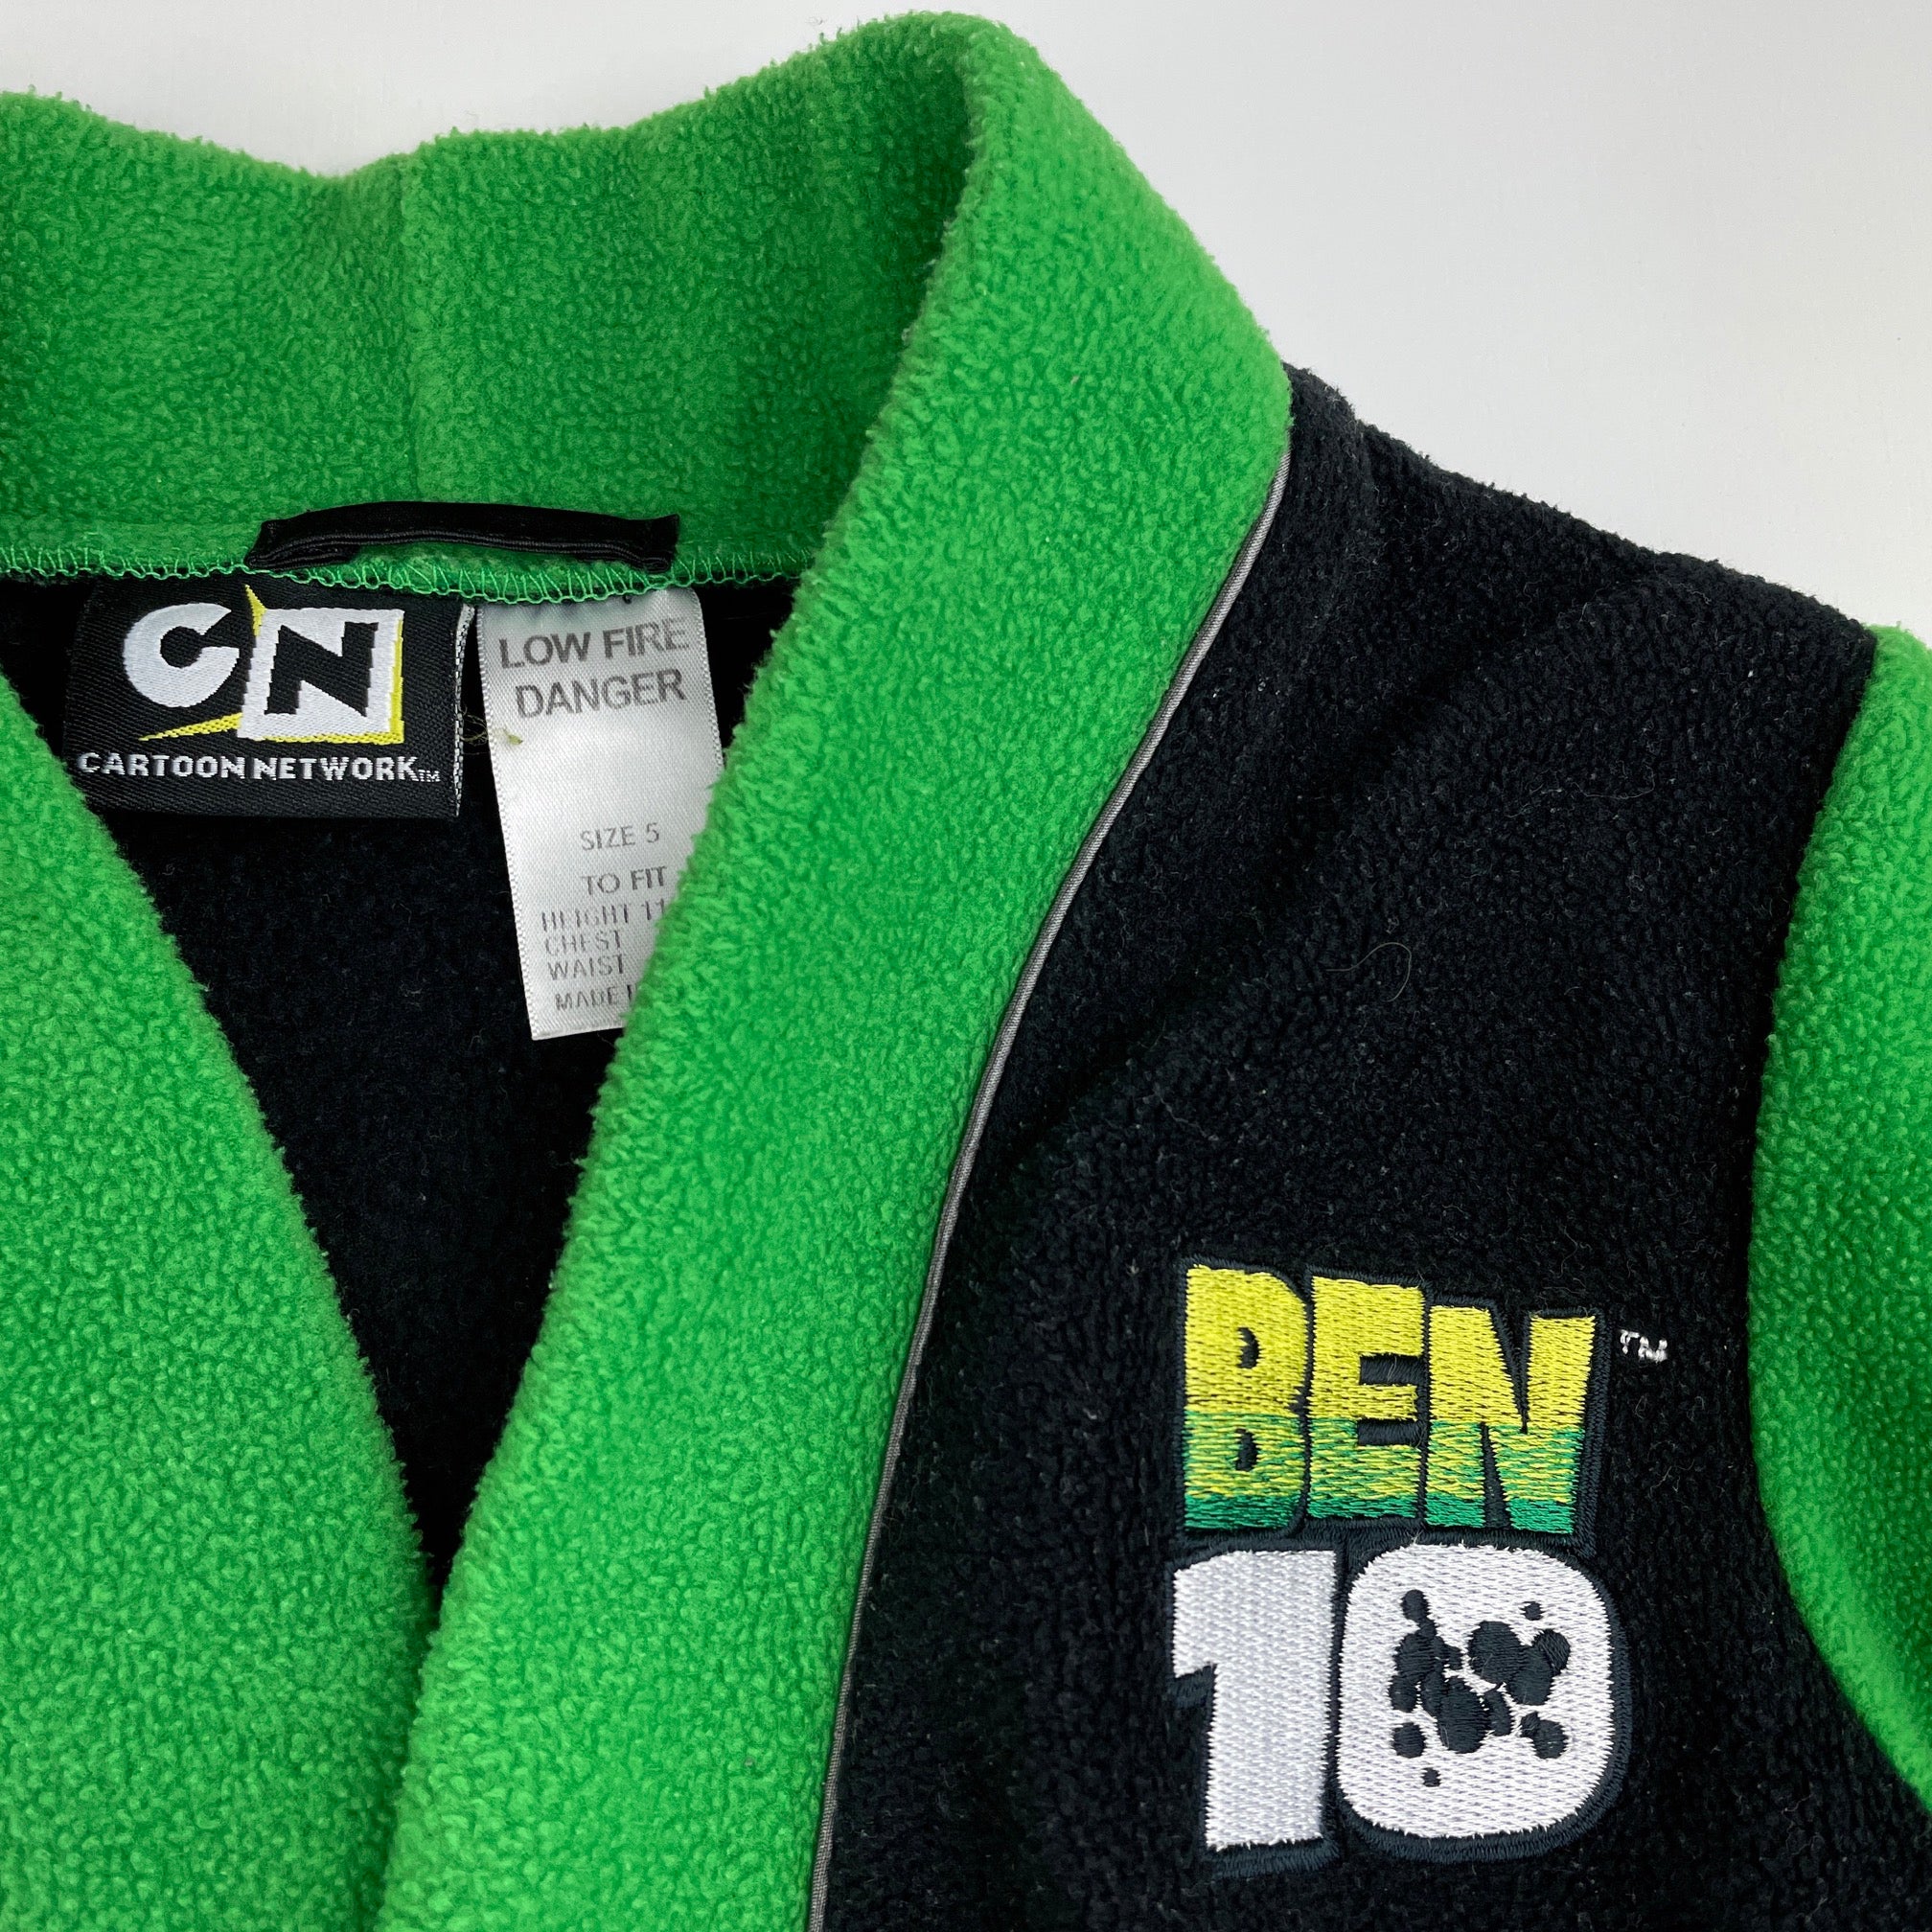 CARTOON NETWORK BOYS Blue Solid Polyester Robe Size 7-8 Years Tie - Ben10  £3.25 - PicClick UK